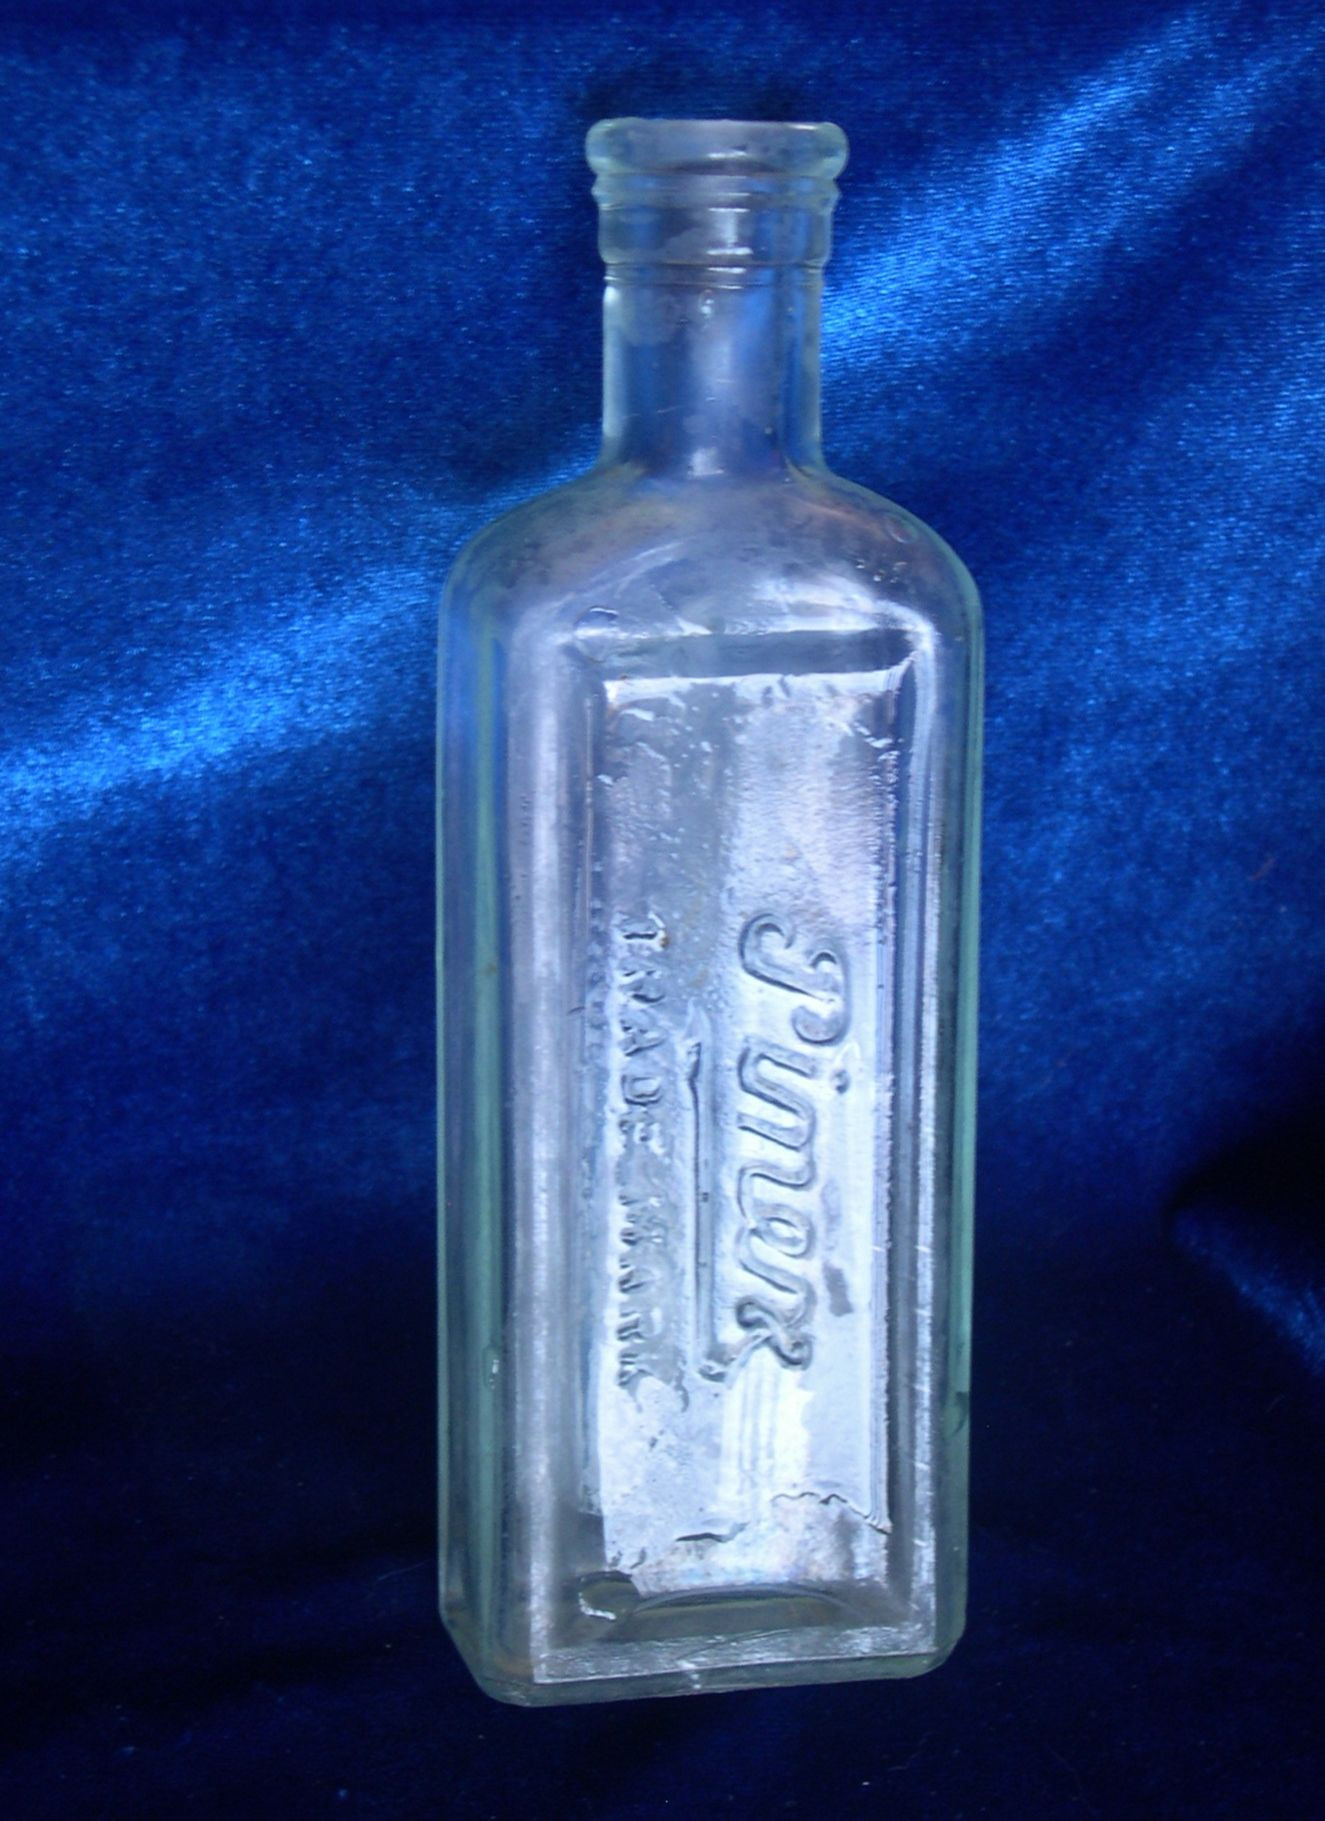 28 Lovable Sugar Mold Glass Vase Inserts 2023 free download sugar mold glass vase inserts of c 1907 antique glass pinex cough syrup bottle collectible bottles intended for this clear glass pinex cough syrup bottle with raised letters dates from betwe